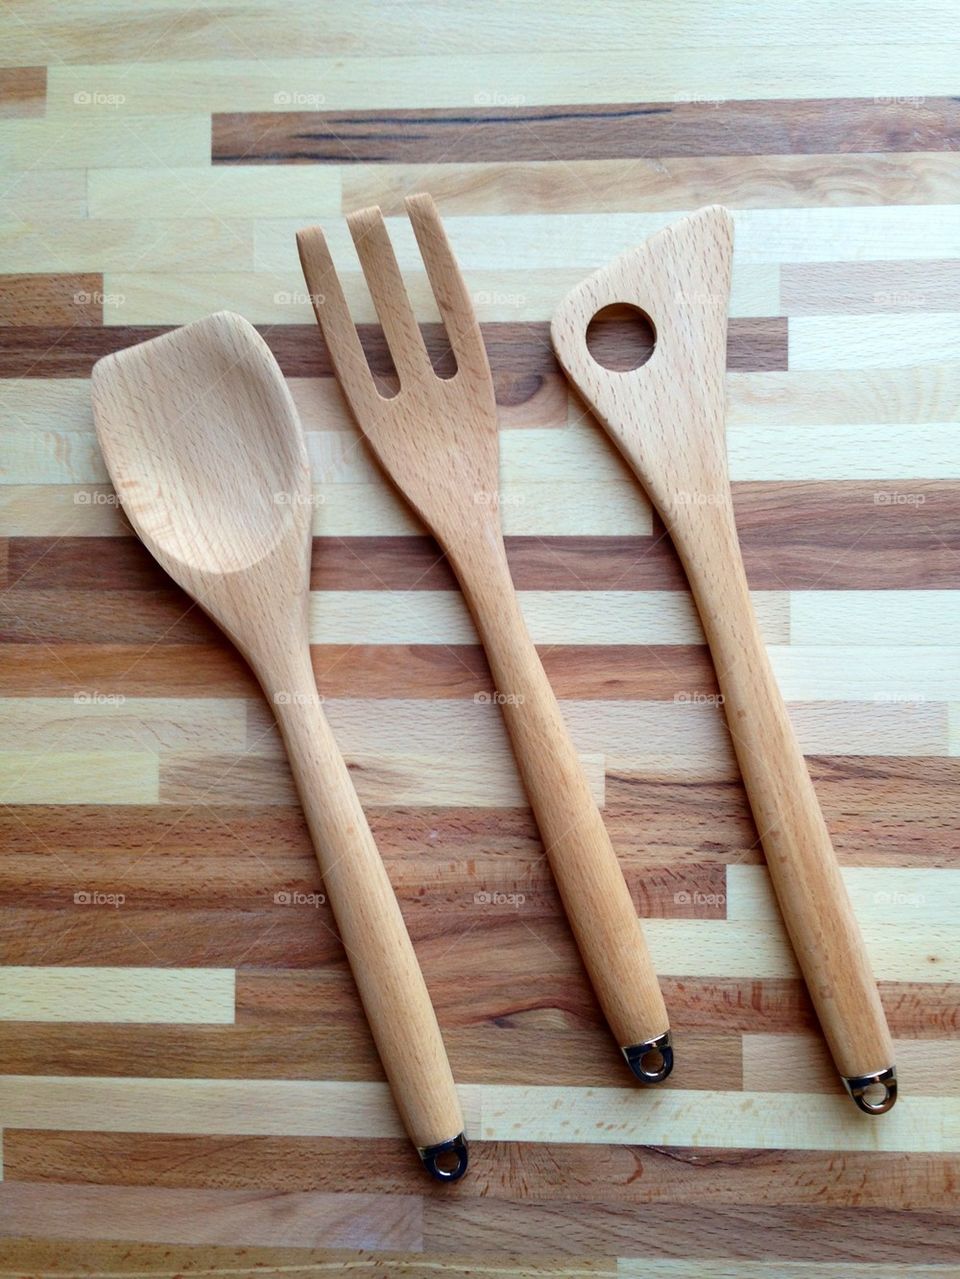 Wood cutting board and utensils